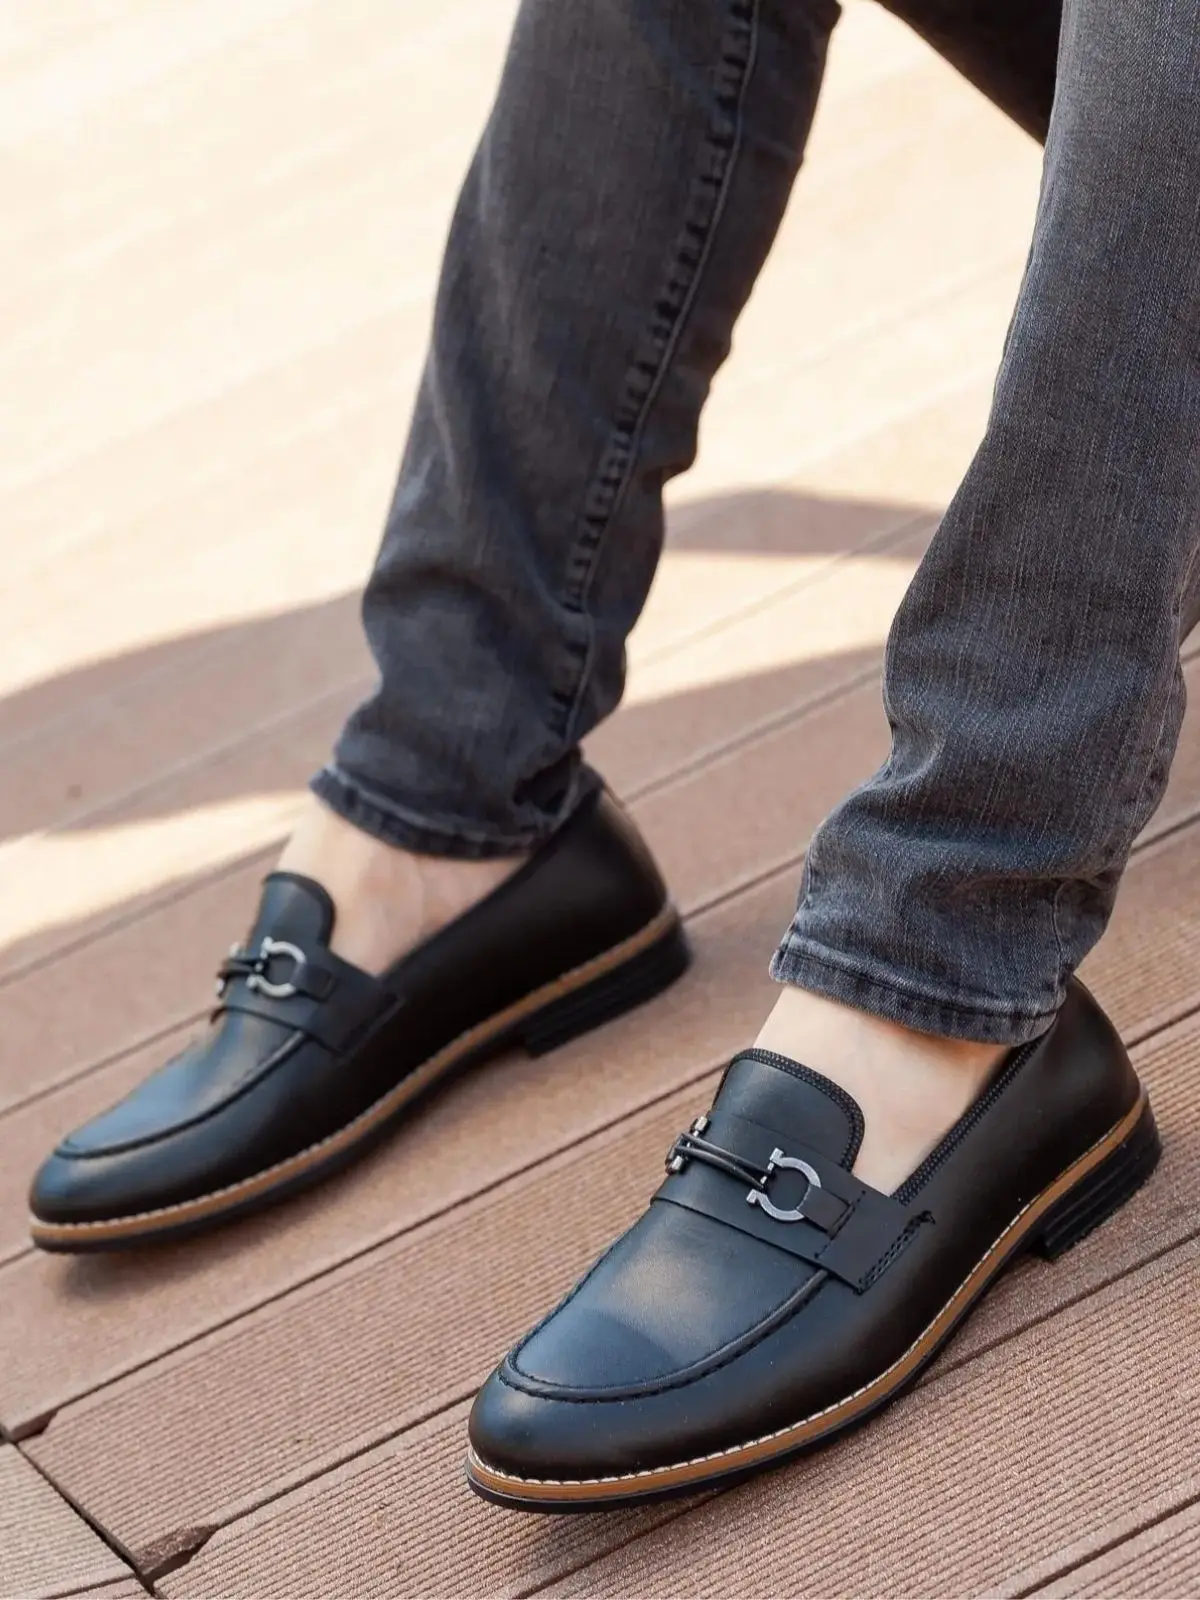 

Orthopedic Casual Men's Shoes, New Season Very Stylish, Soft Comfortable 4 Seasons Flexible Daily Use 1st Degree Material